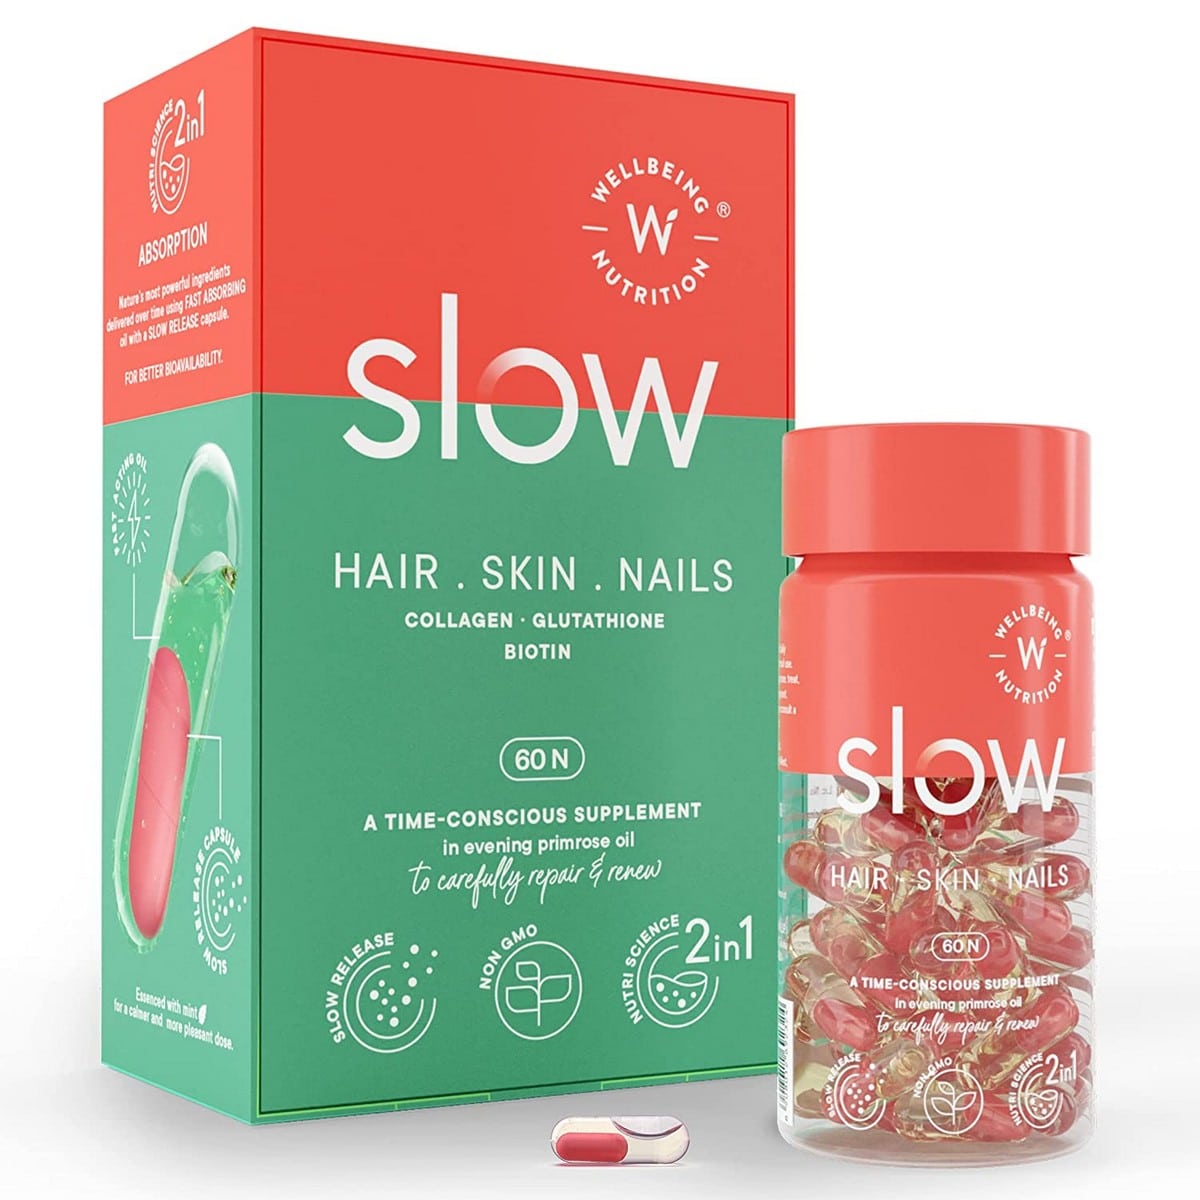 Hair Skin and Nails Supplement | Premier Research Labs